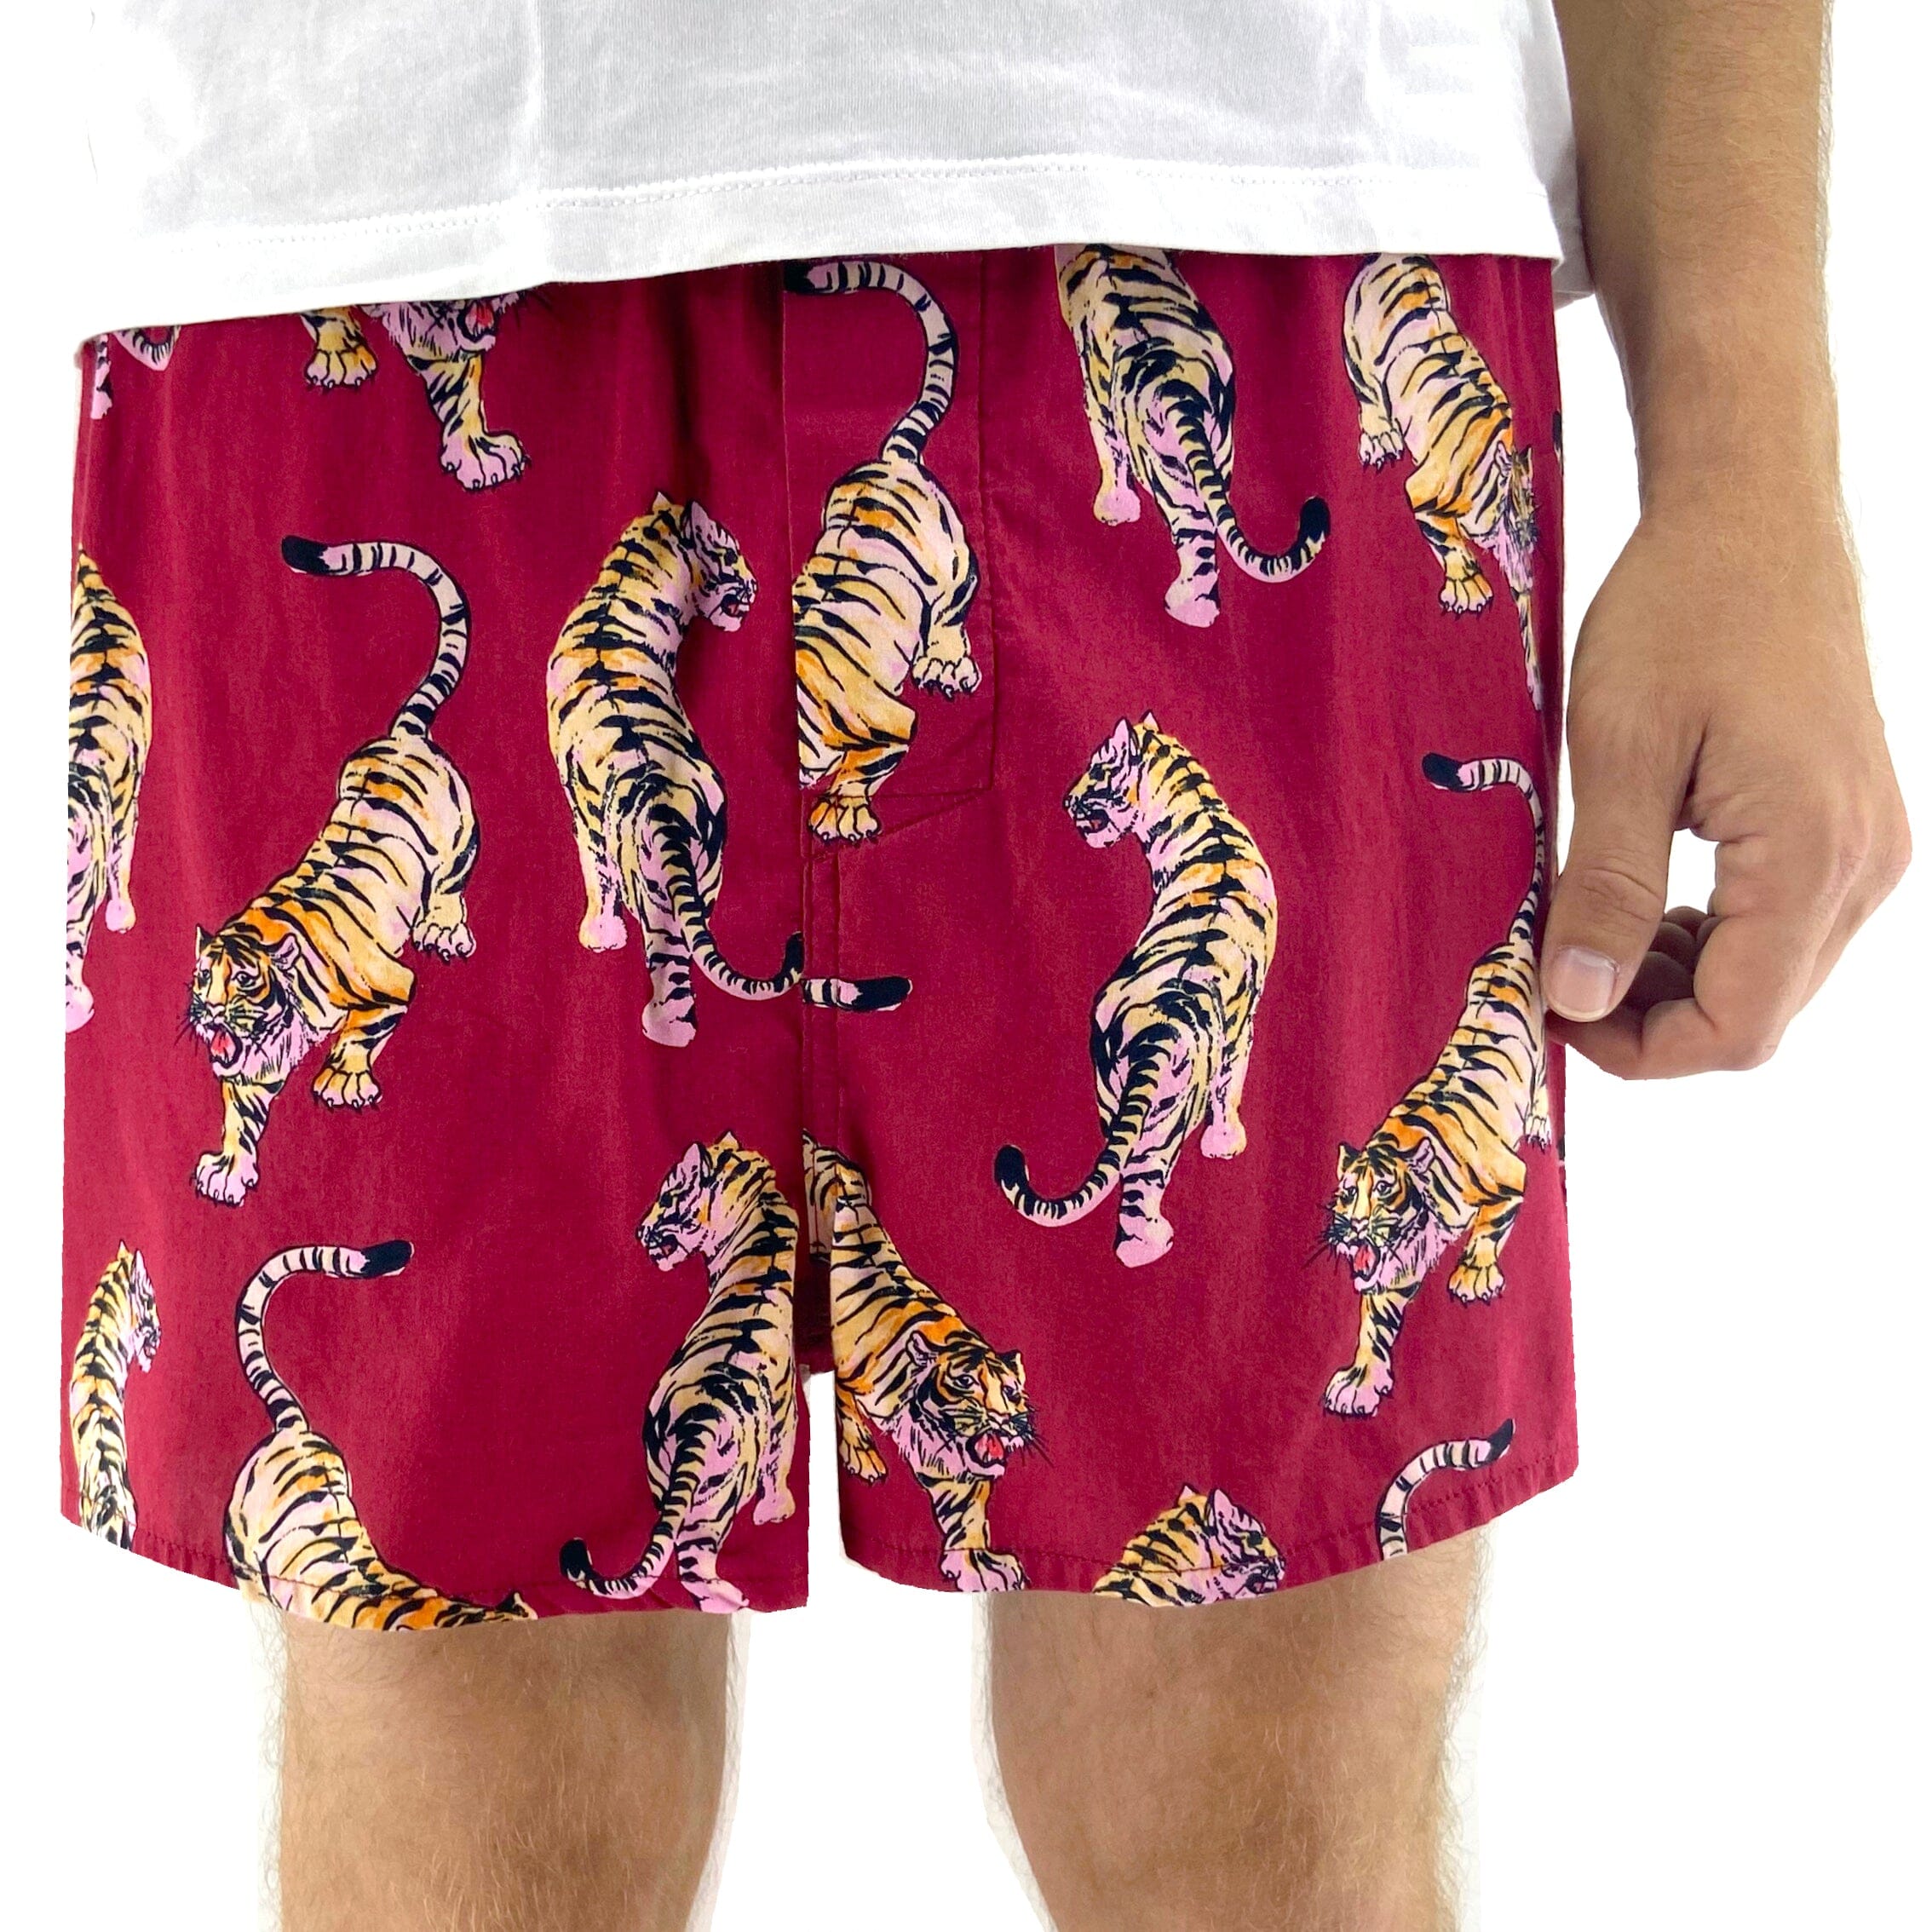 Men's Siberian Tiger All Over Print Soft Cotton Boxer Shorts in Red